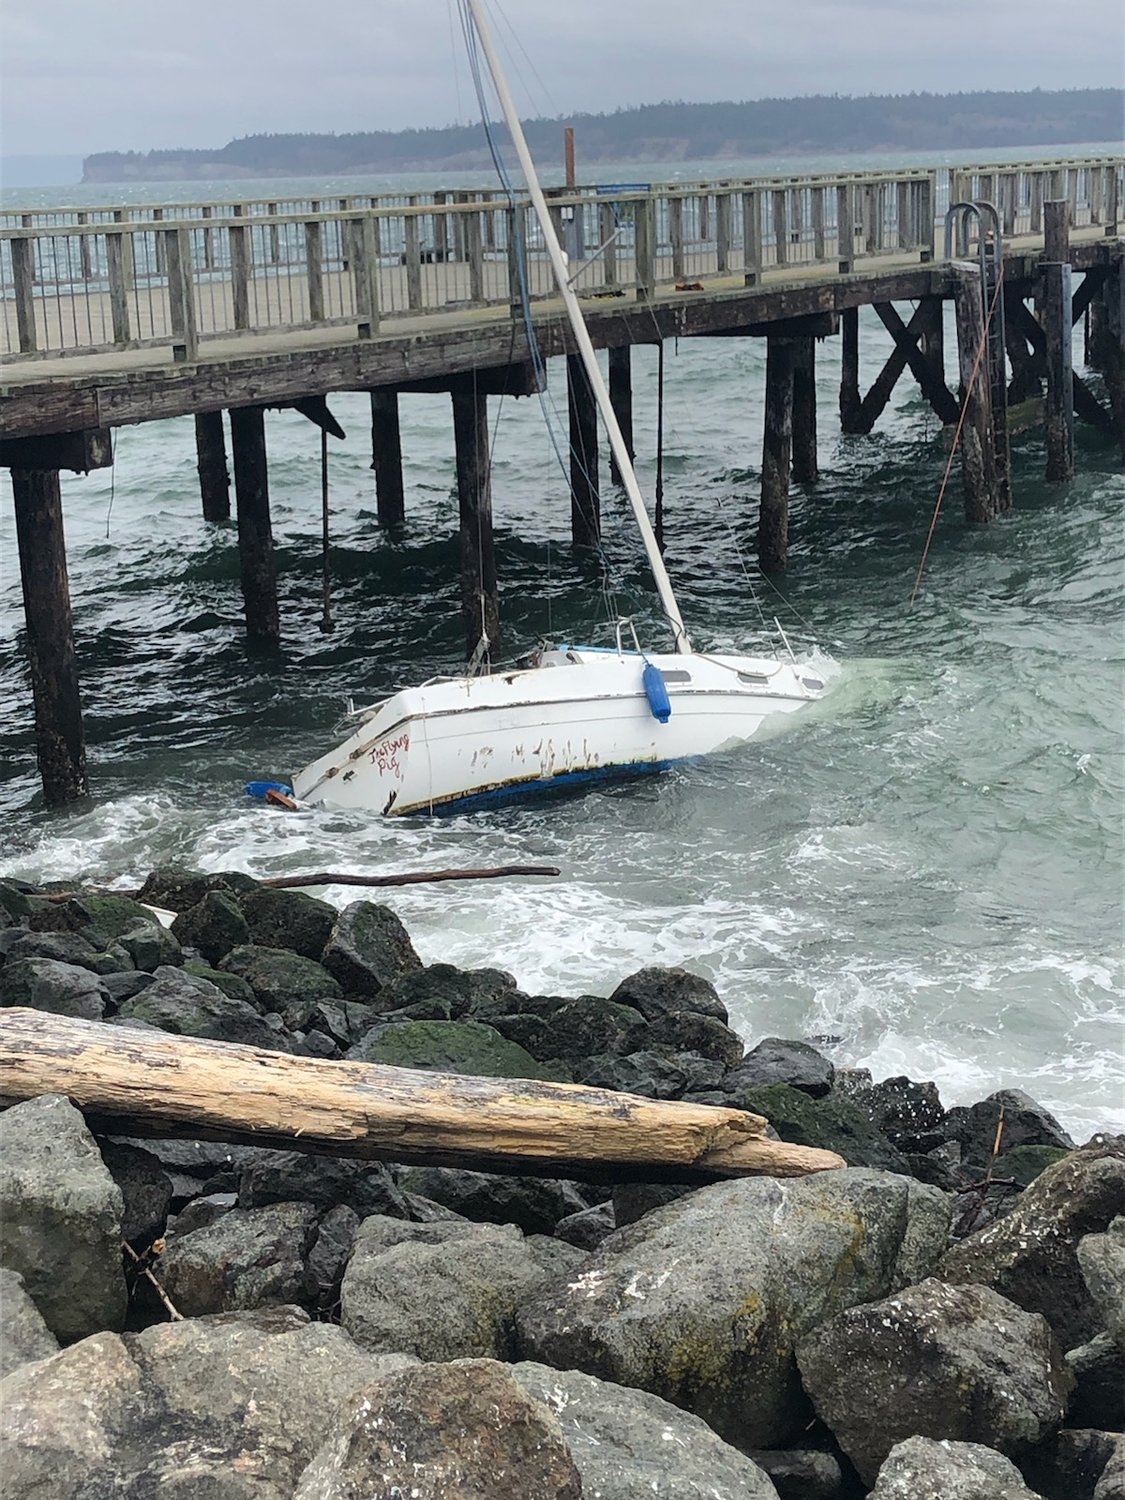 A sailboat bearing the name “Flying Pig” met an unfavorable fate Sunday near the city dock.